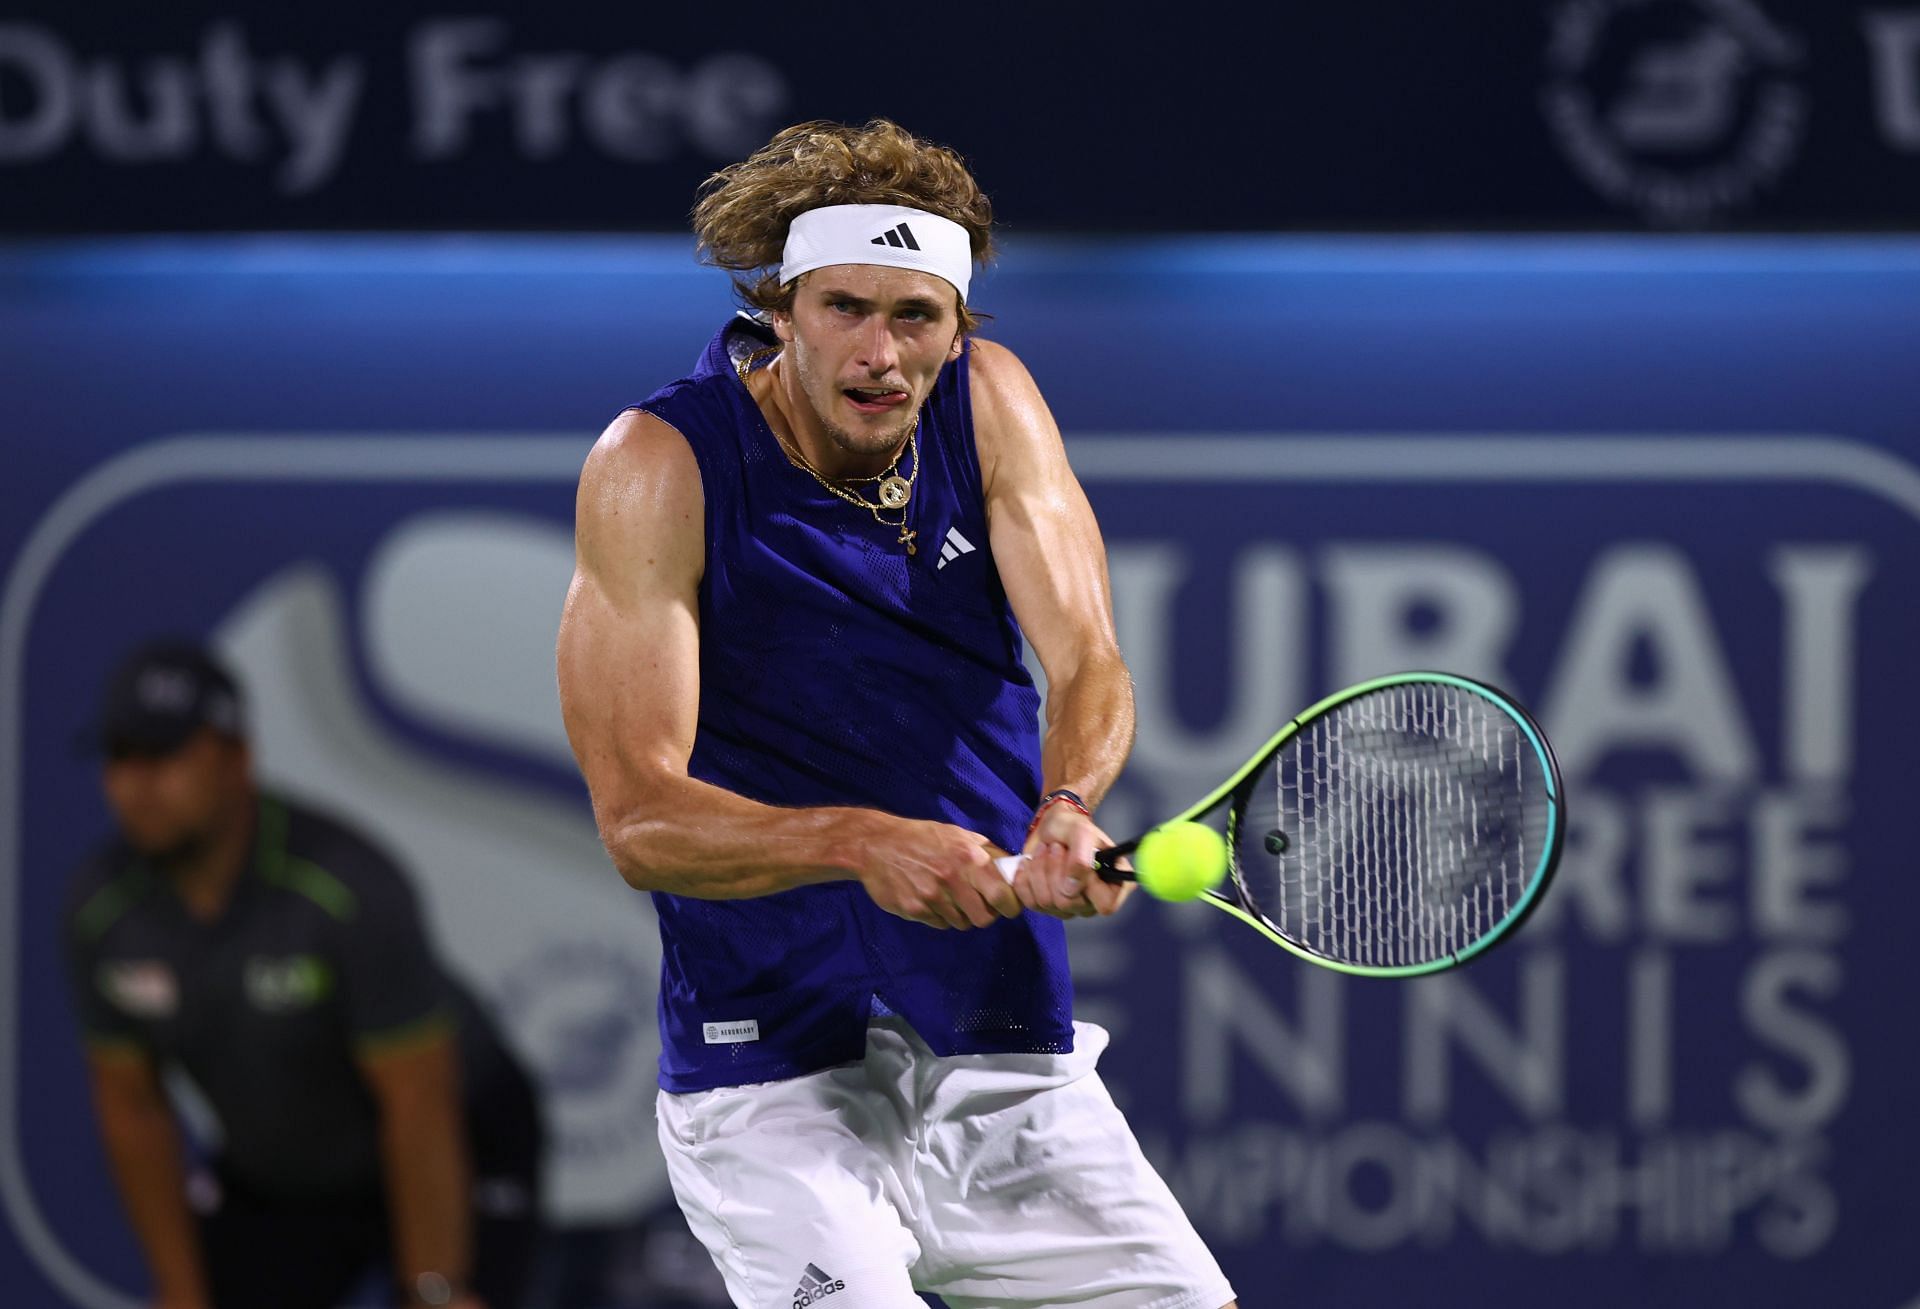 Alexander Zverev at the Dubai Tennis Championships. (PC: Getty Images)